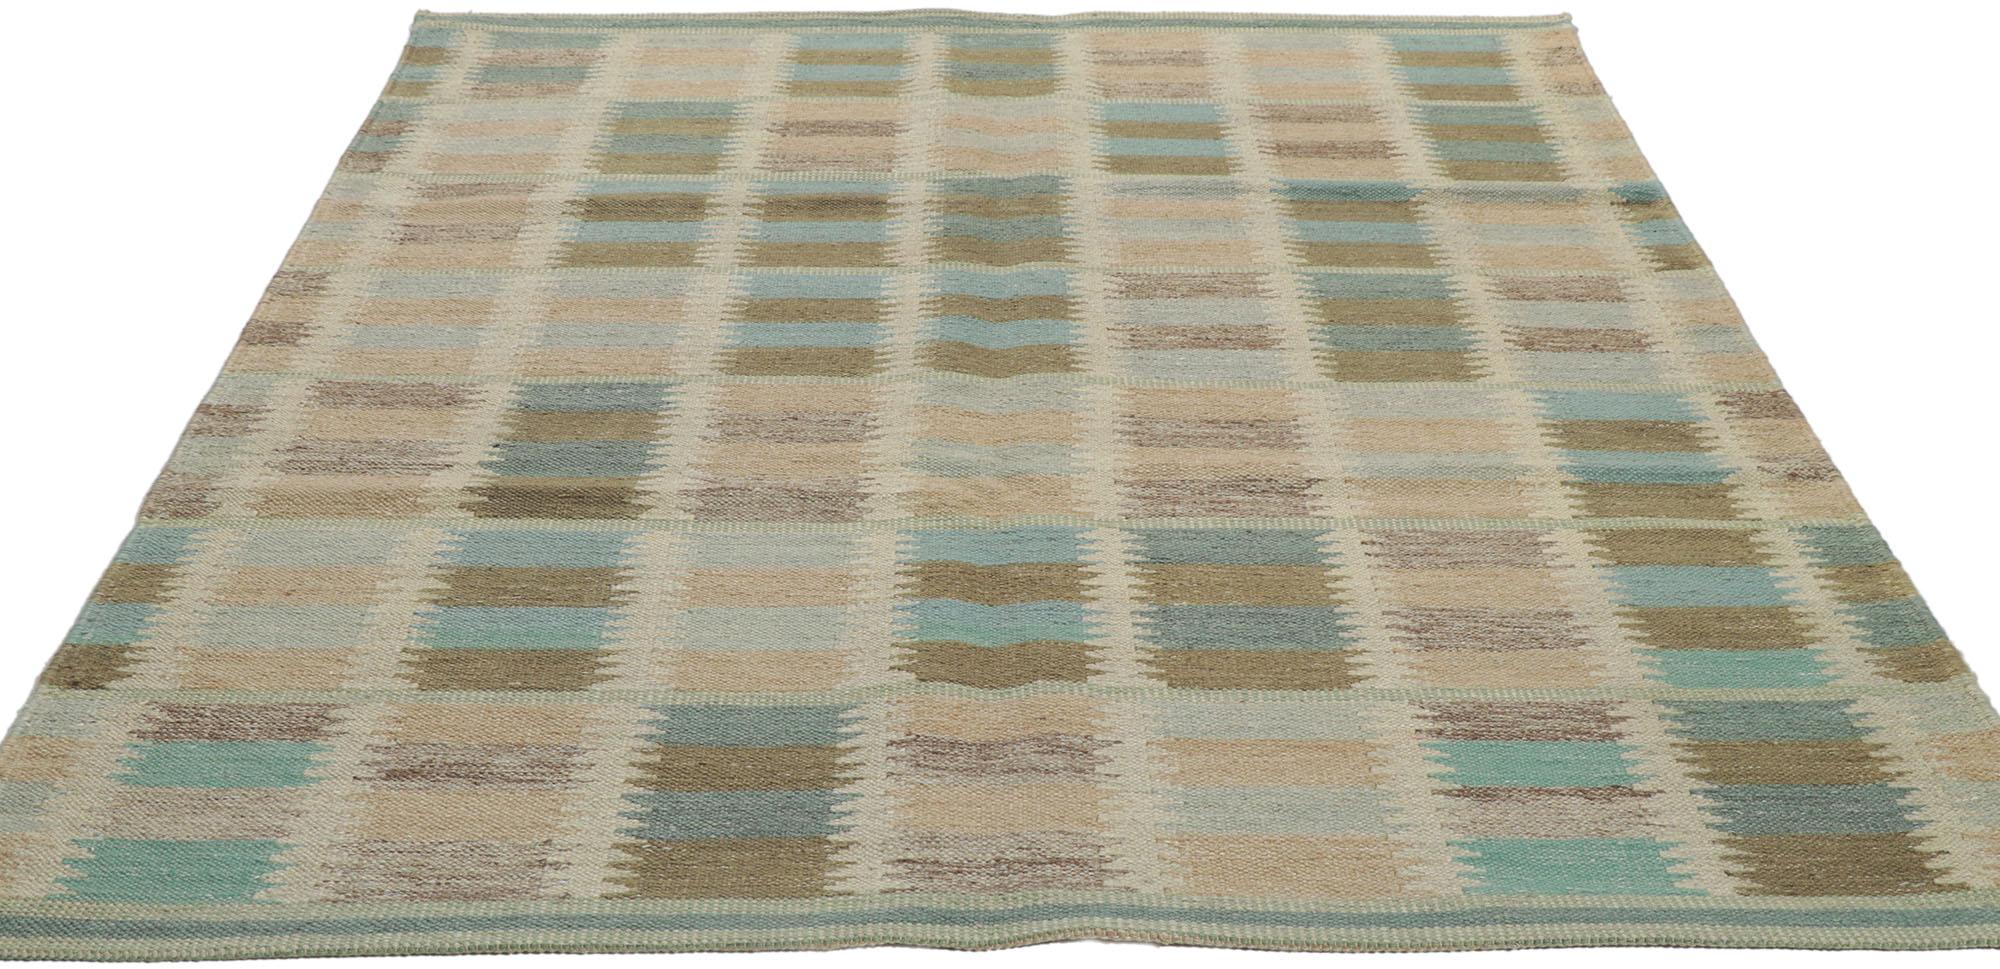 New Swedish Inspired Kilim Rug, Scandinavian Modern Meets Earth-Tone Elegance In New Condition For Sale In Dallas, TX